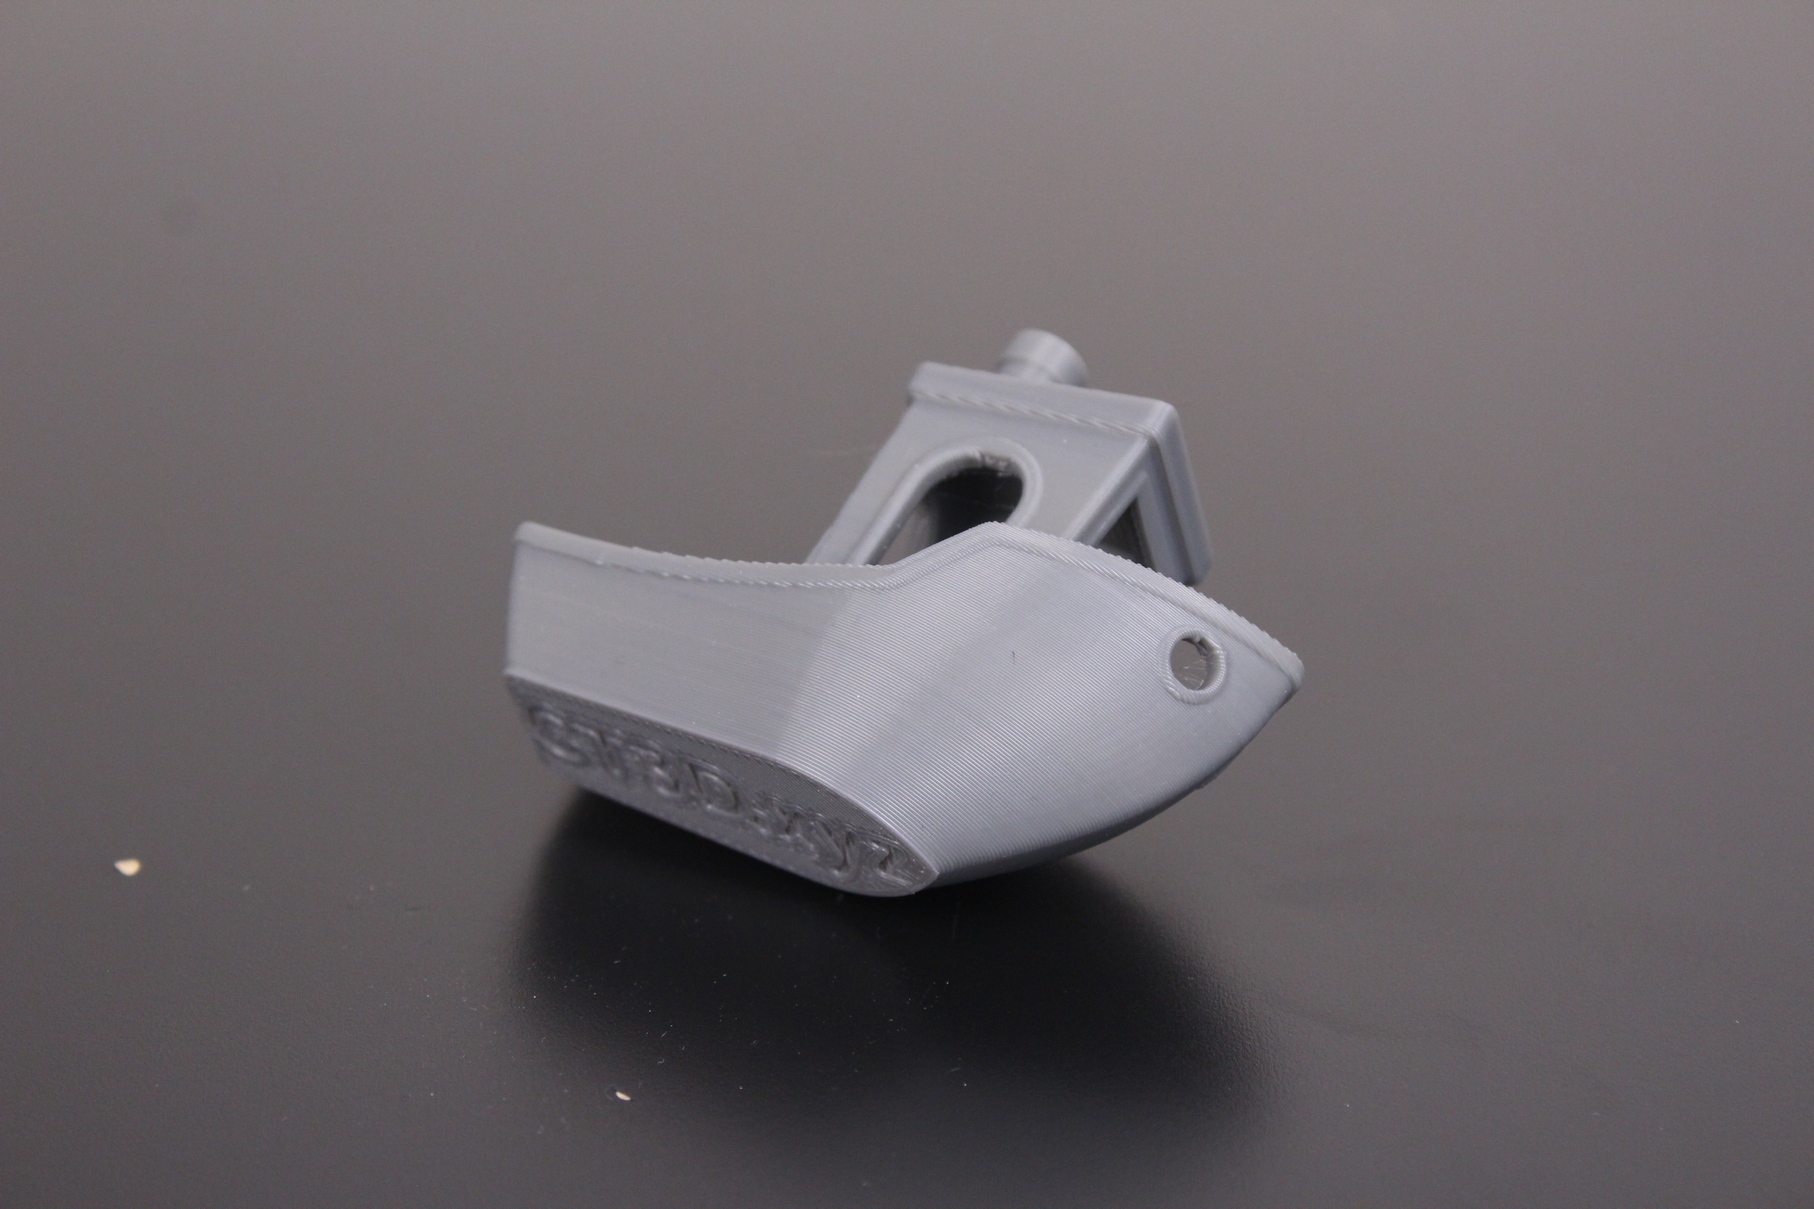 Voxelab Aries Review 3DBenchy pritned in PLA 1 | Voxelab Aries Review: A Worthy Upgrade for the Aquila?